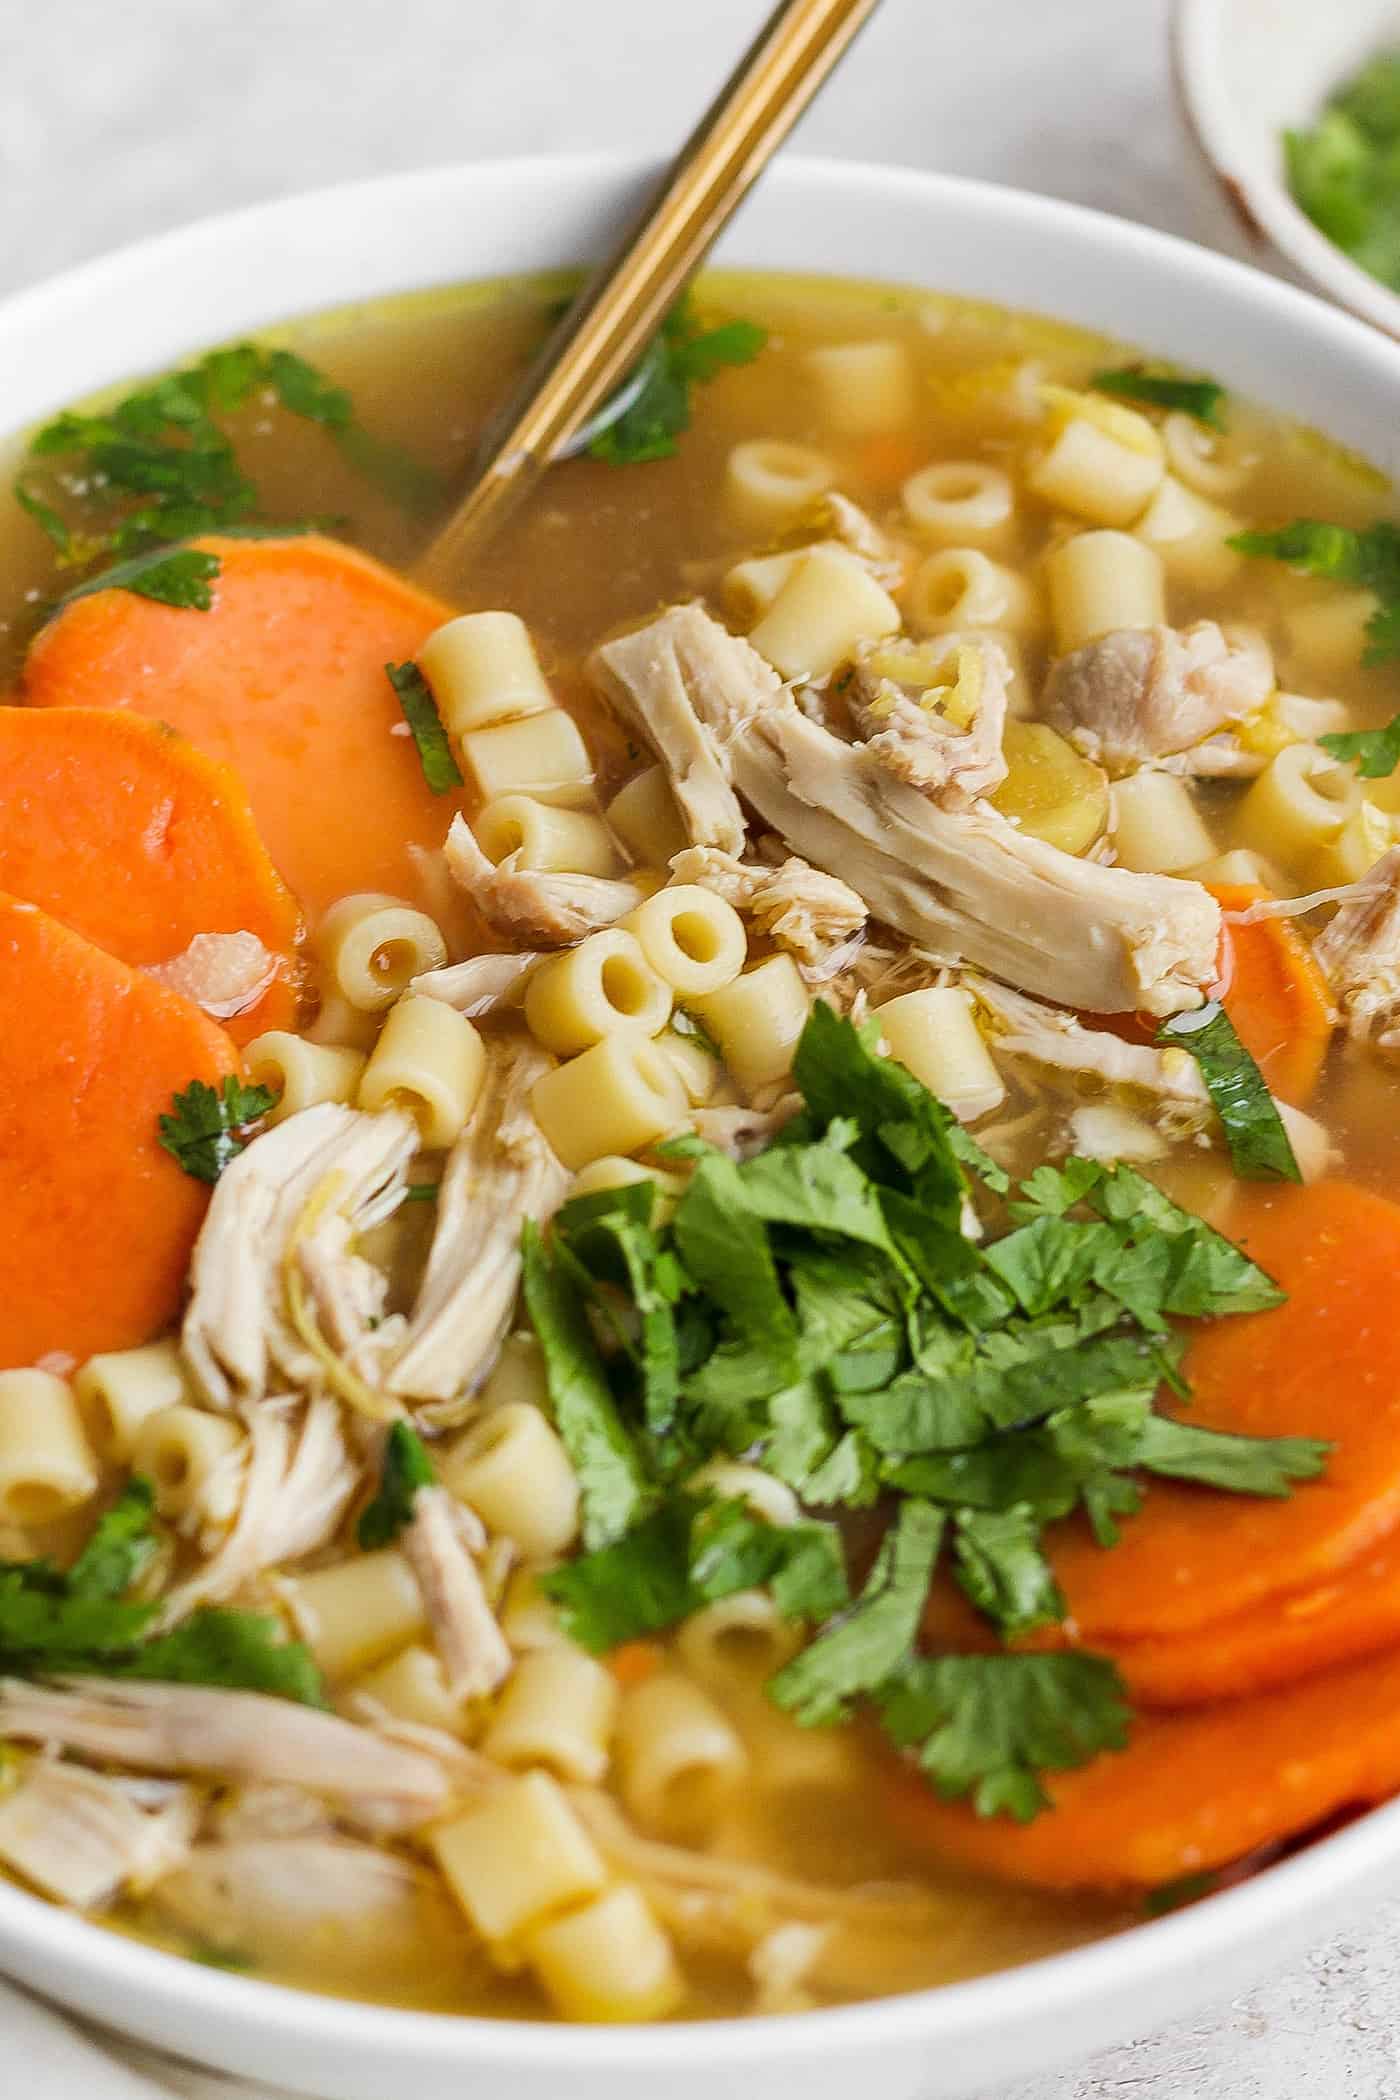 A bowl of ginger chicken soup topped with shredded chicken and sweet potatoes.